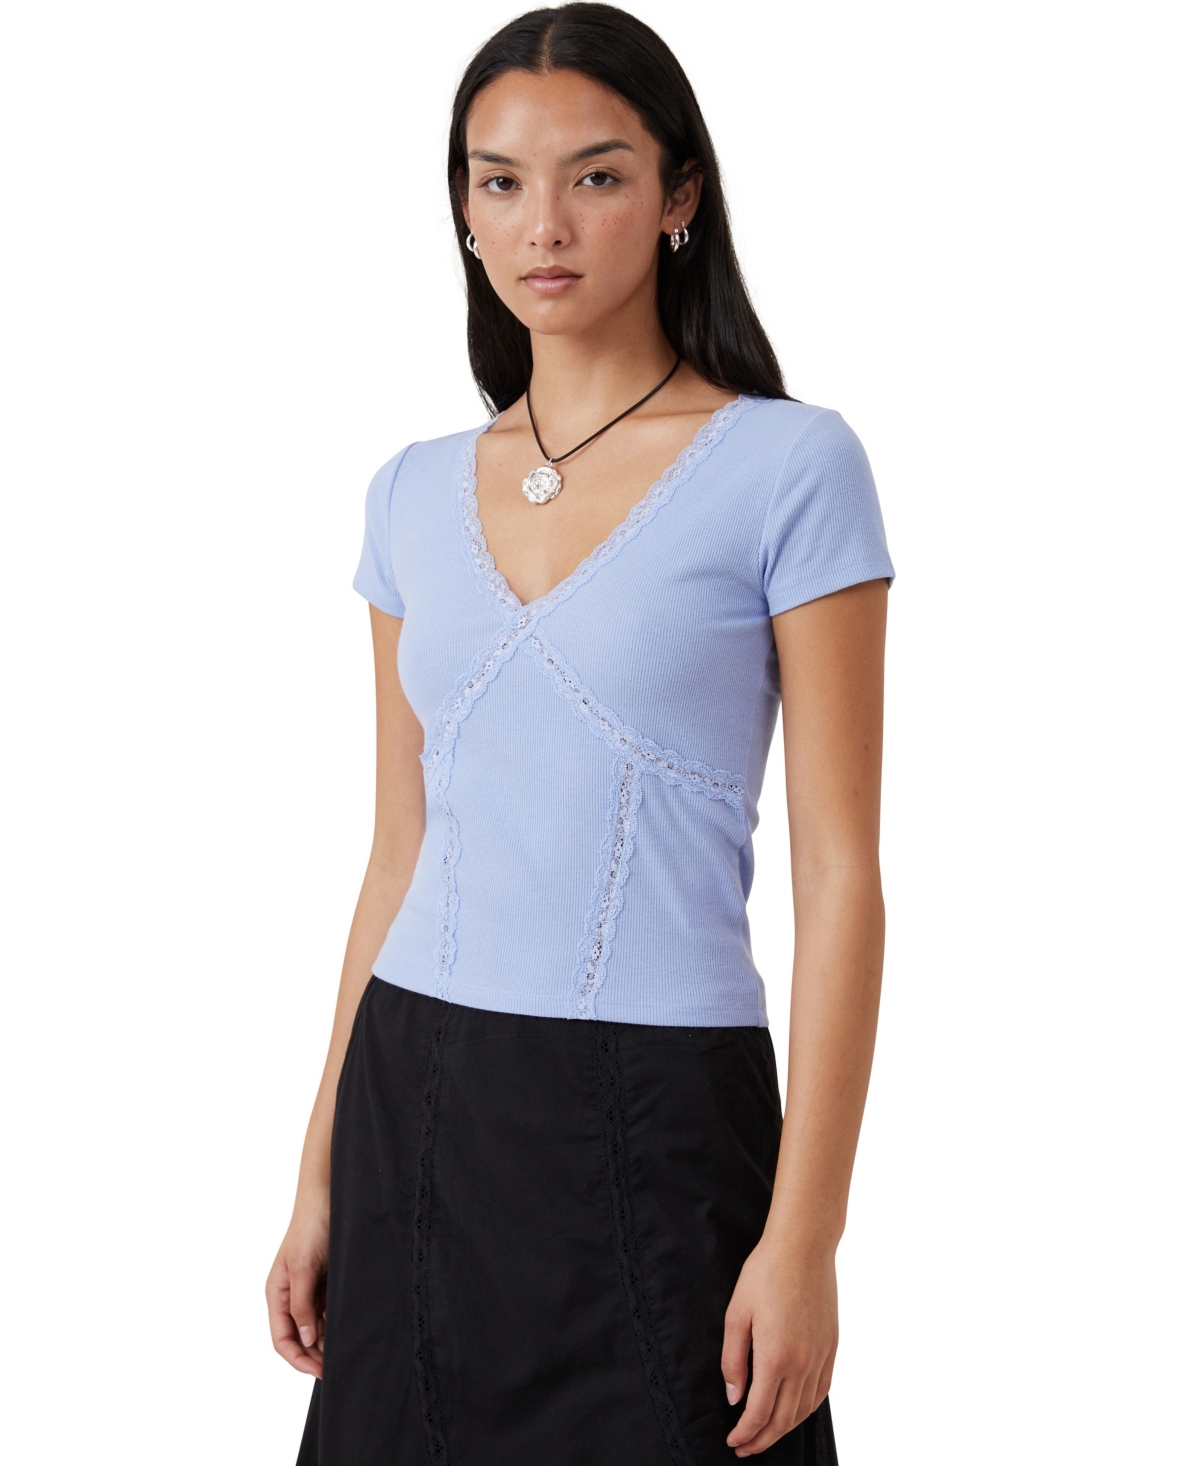 Women's Daisy Lace Trim T-shirt - Frosted Blue